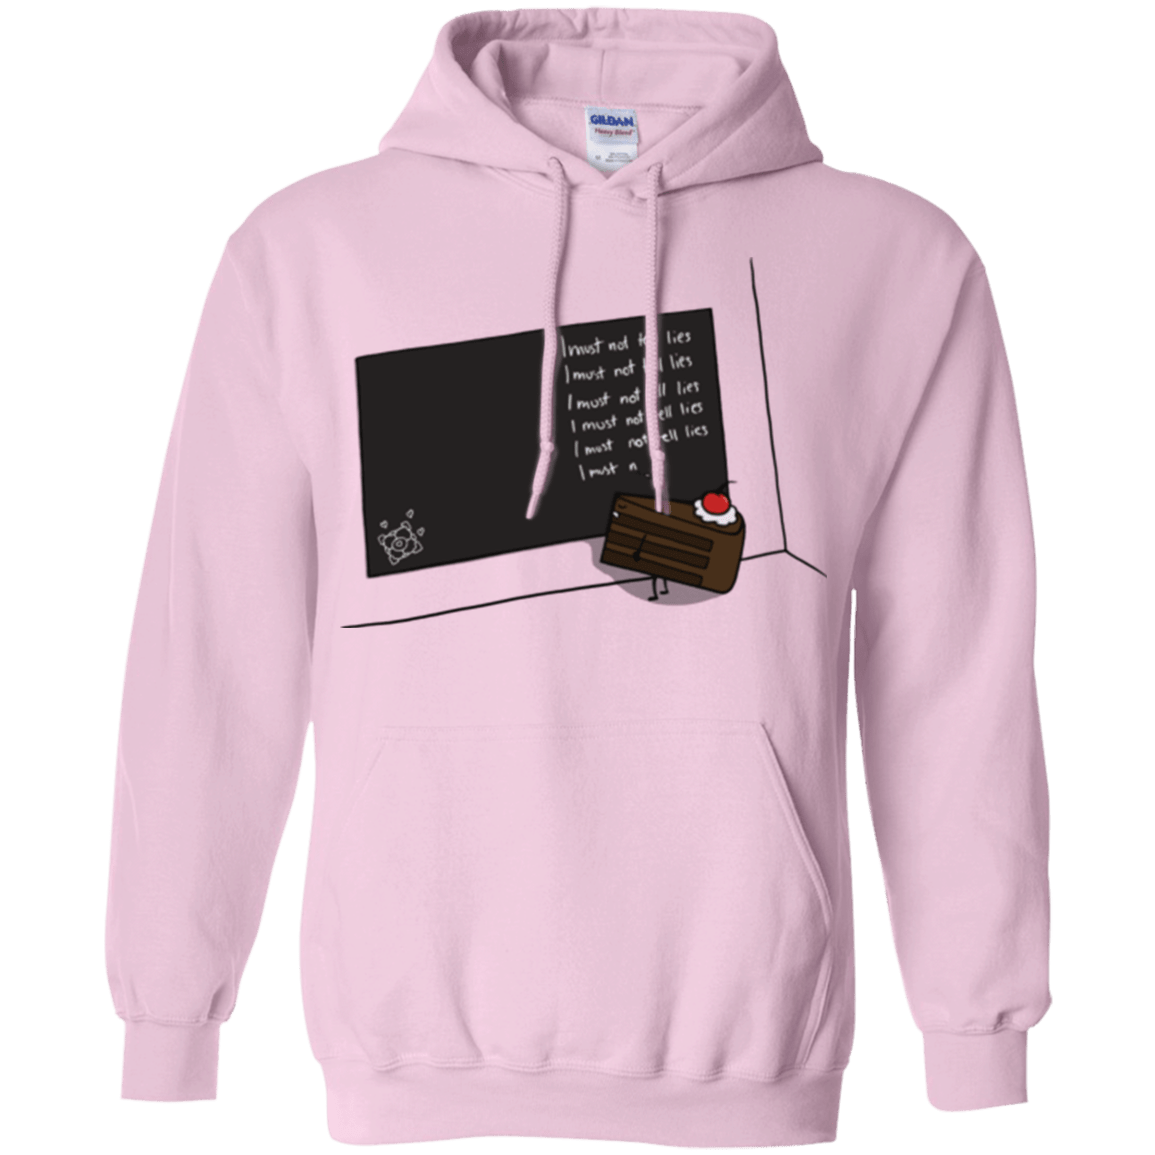 Sweatshirts Light Pink / Small The Cake is a Lie Pullover Hoodie